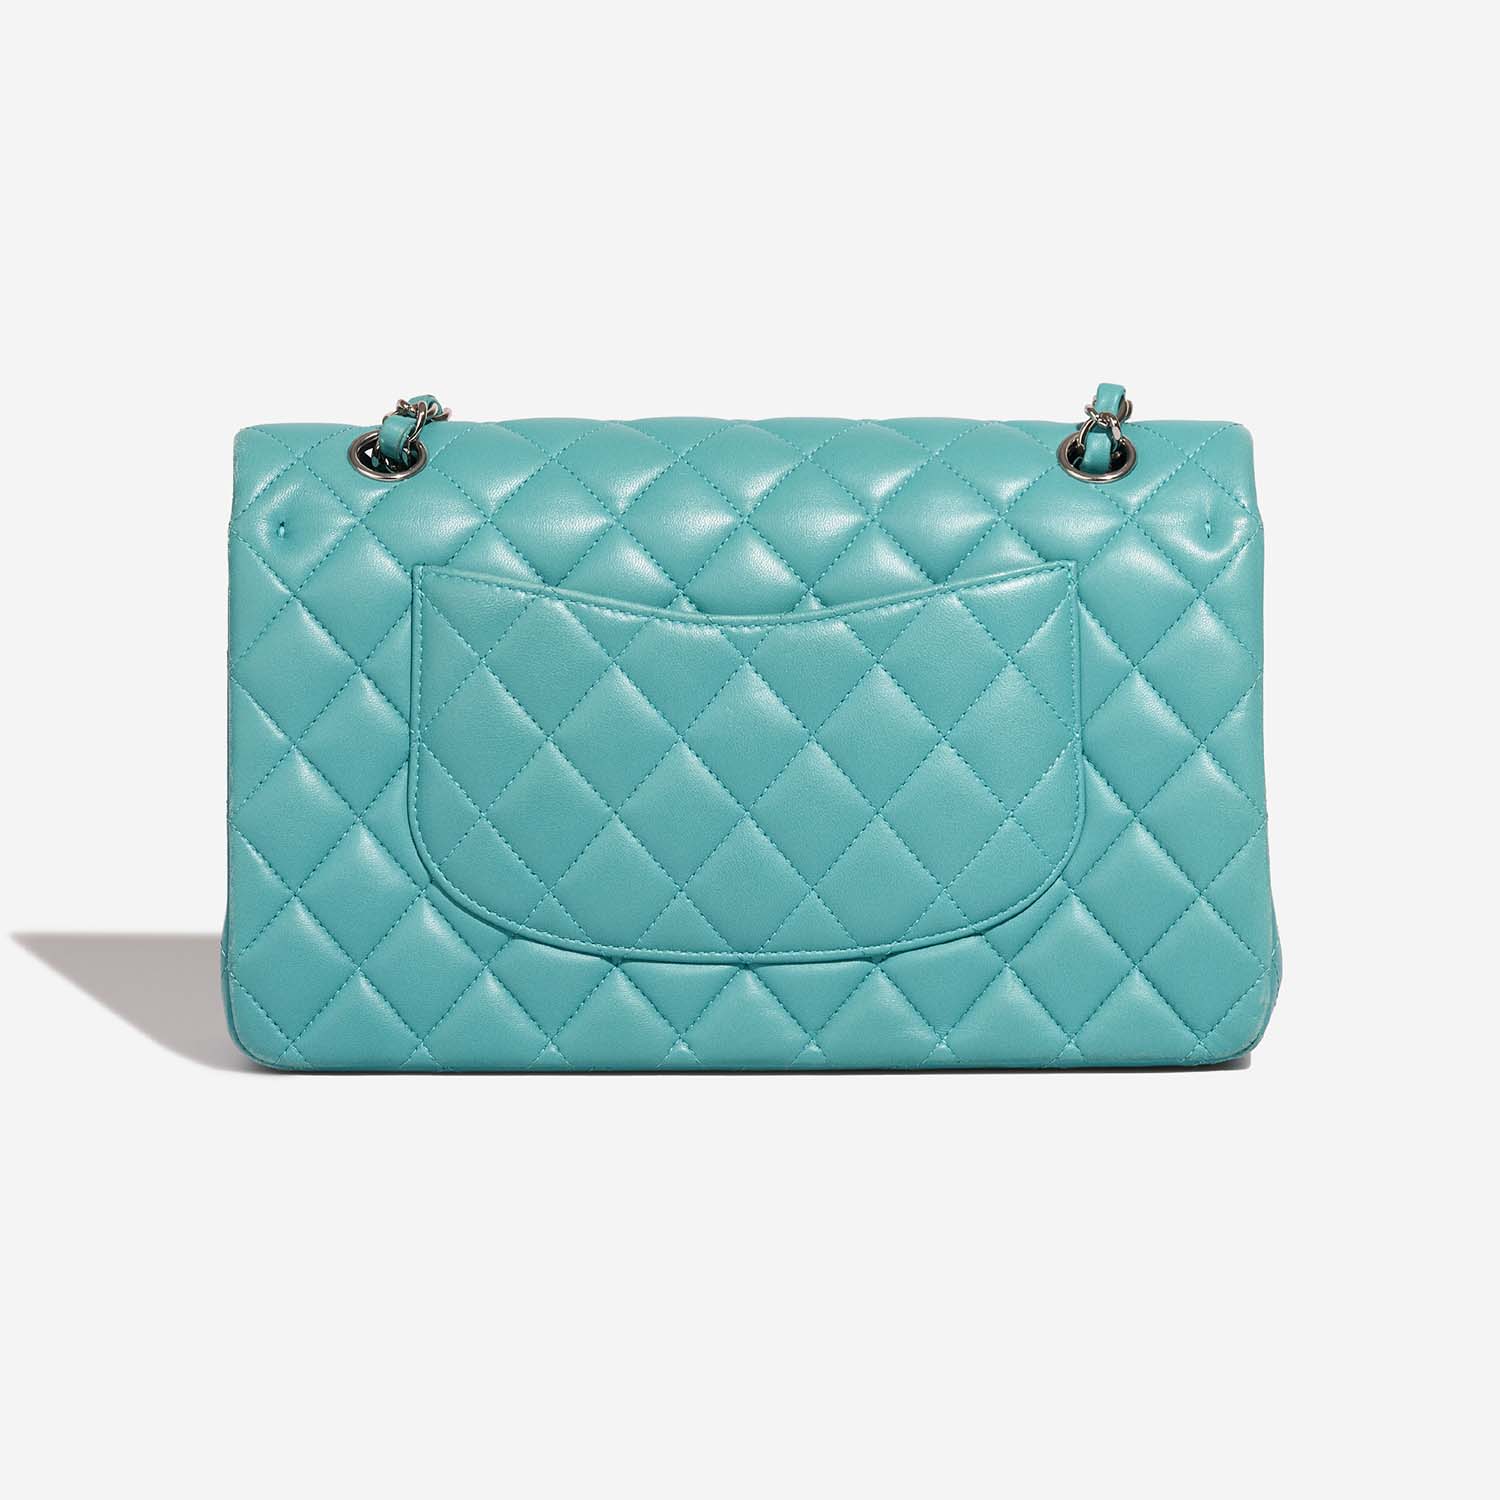 Chanel Timeless Medium Turquoise Back  | Sell your designer bag on Saclab.com